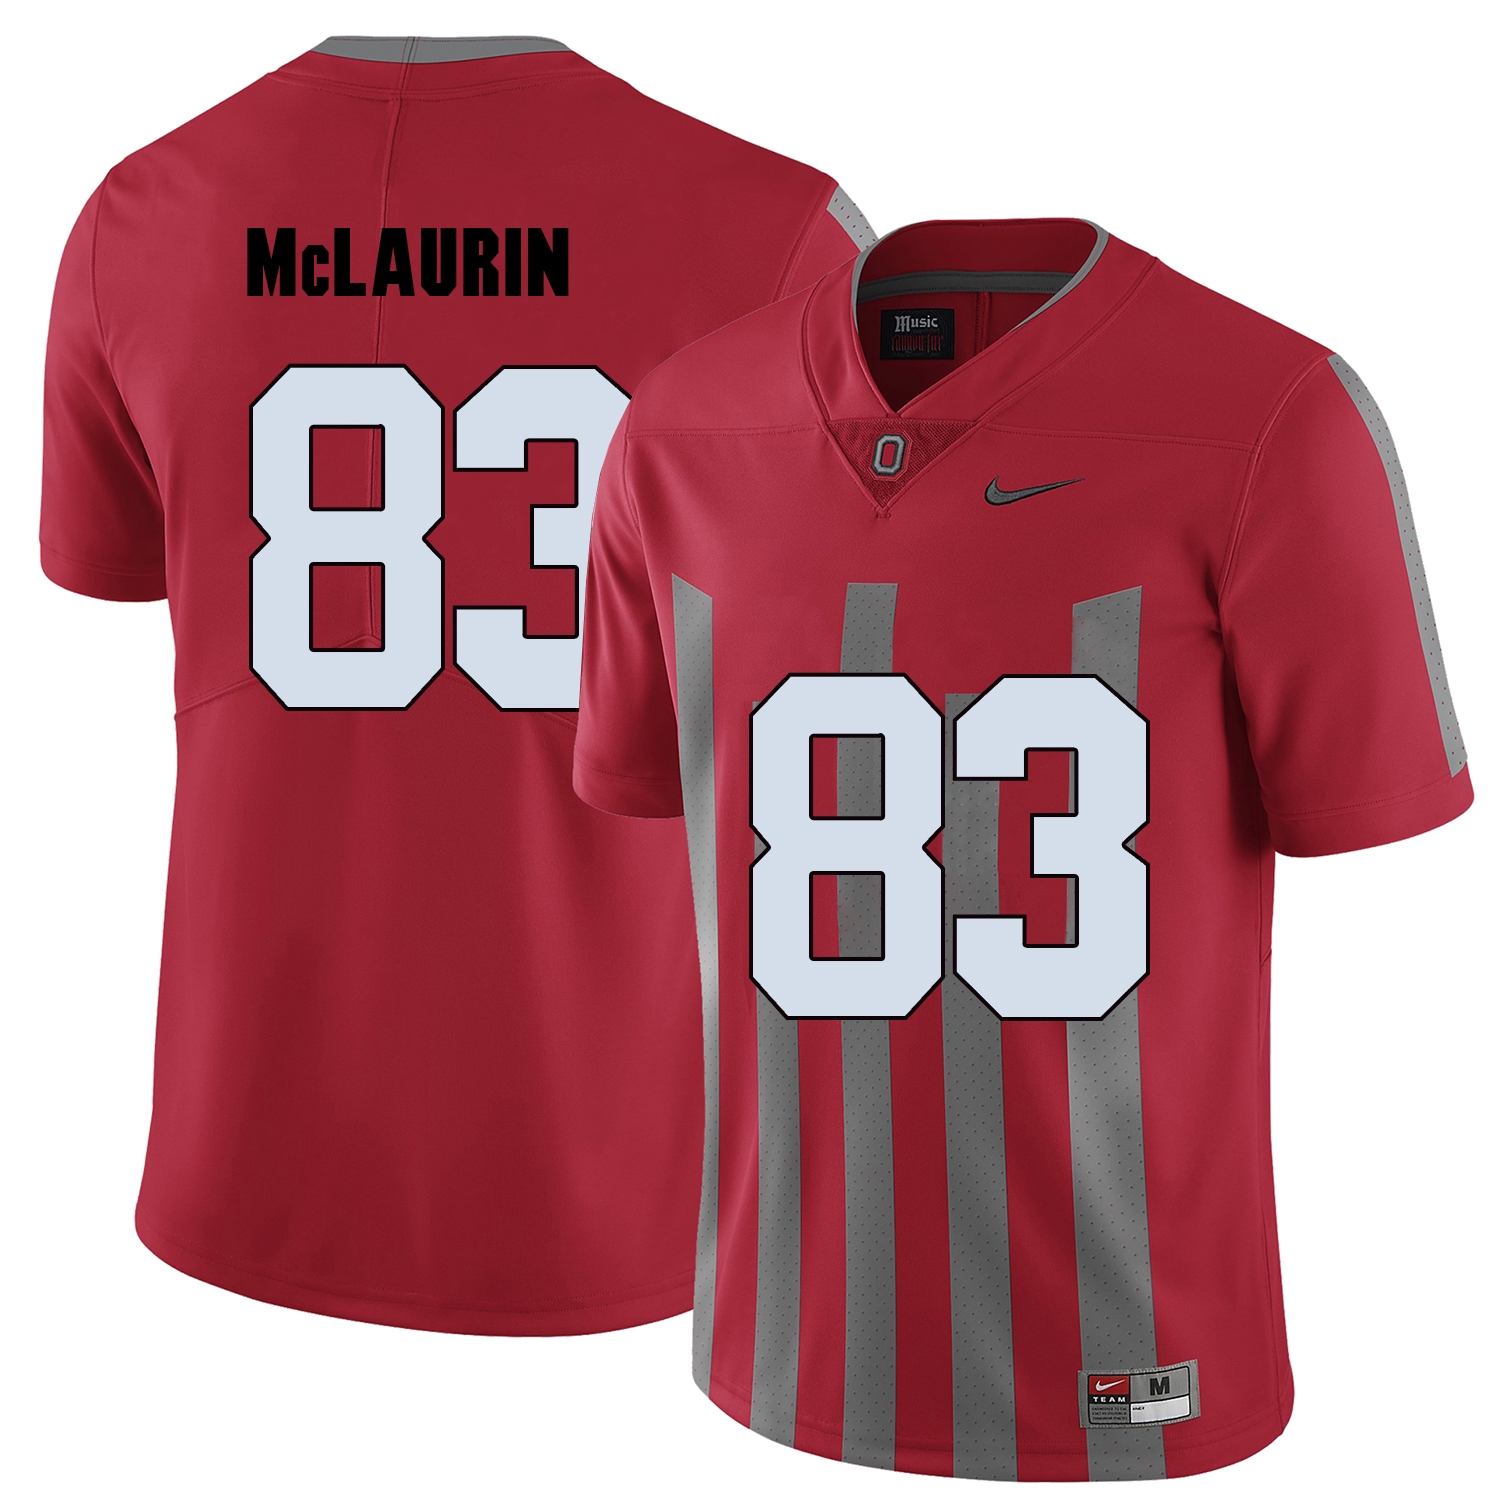 Ohio State Buckeyes Men's NCAA Terry McLaurin #83 Red Elite College Football Jersey TON7849SW